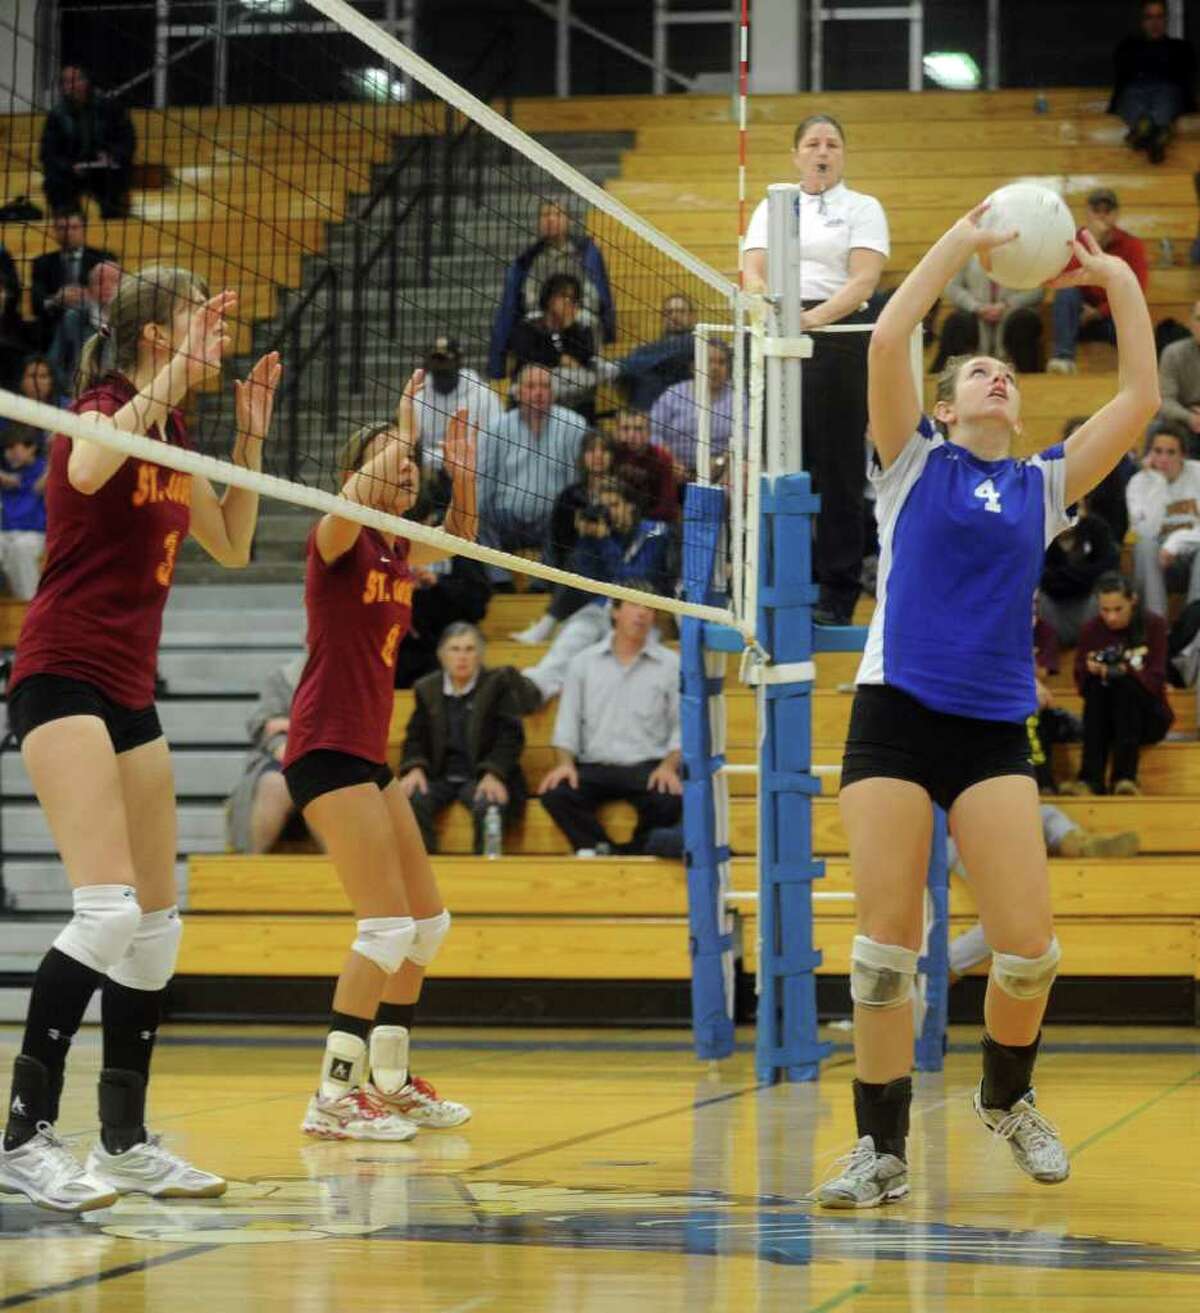 Darien's Mackenzie Begley, right, sets the ball during Thursday's FCIAC volleyball semifinal game against St. Joseph's at Fairfield Ludlowe High School on November 4, 2010.